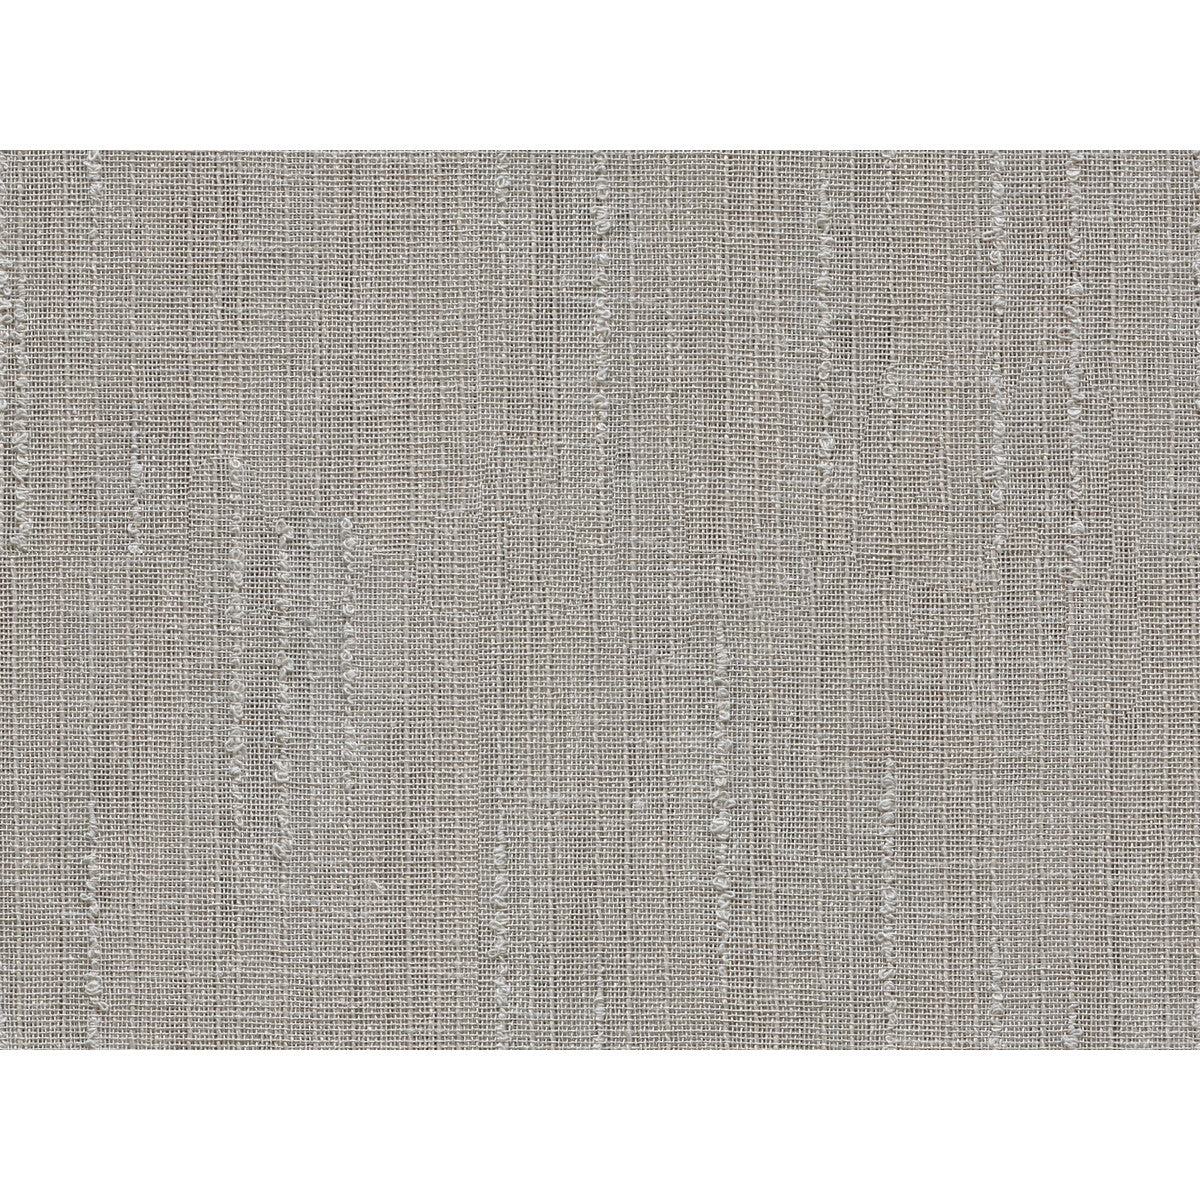 Kravet Contract fabric in 4535-11 color - pattern 4535.11.0 - by Kravet Contract